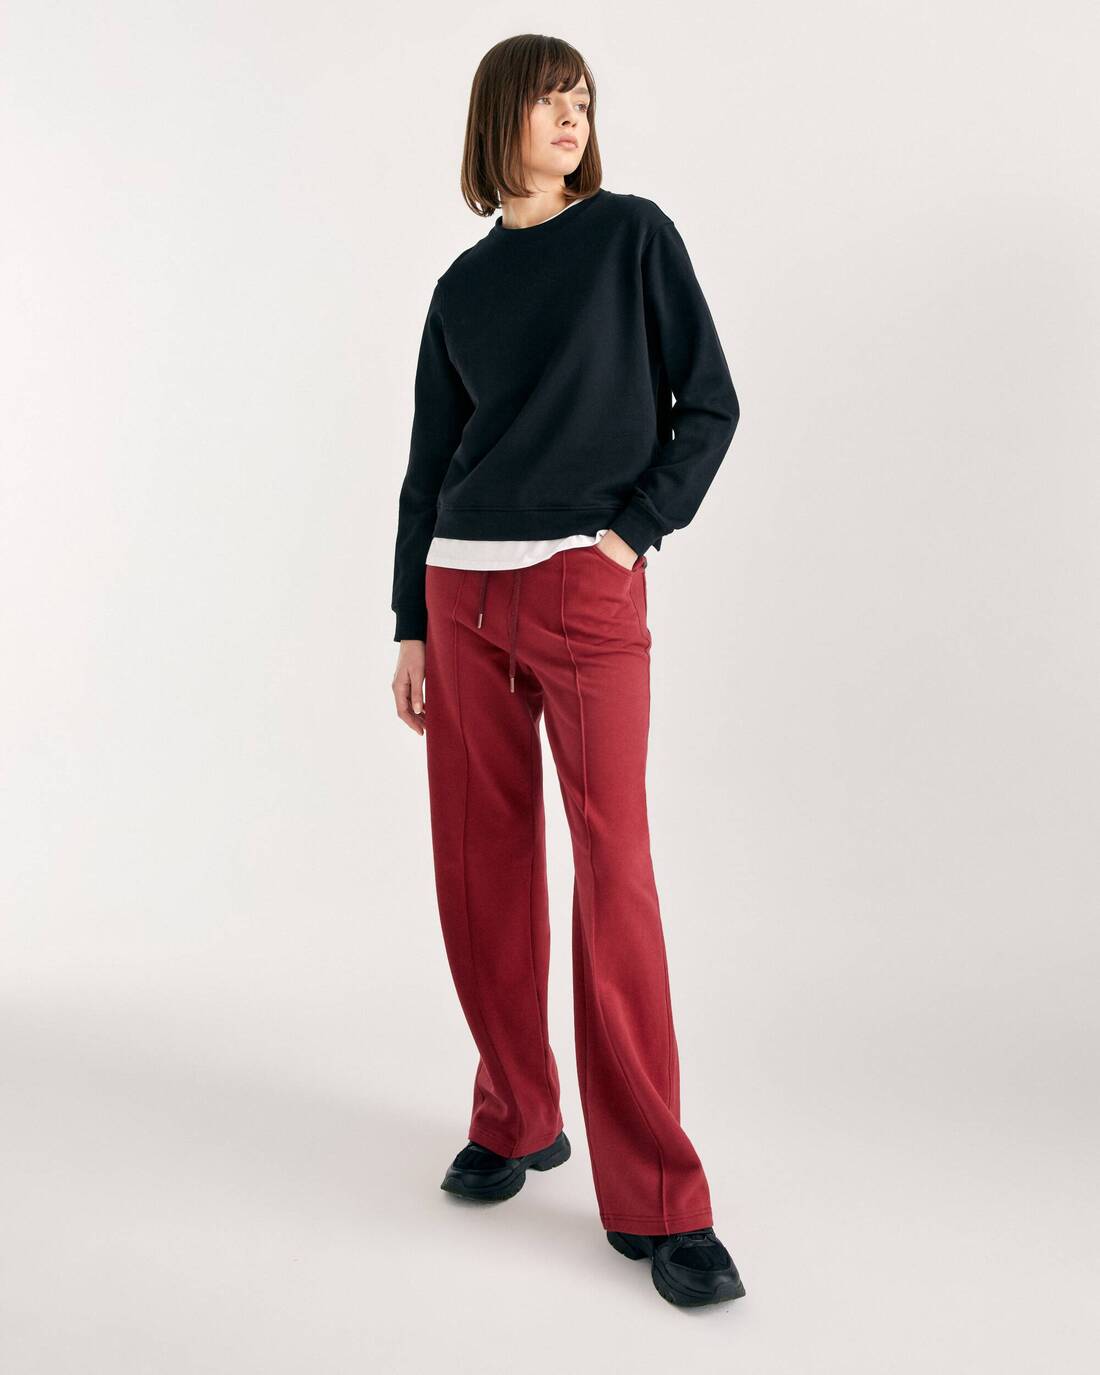 Elongated footer trousers